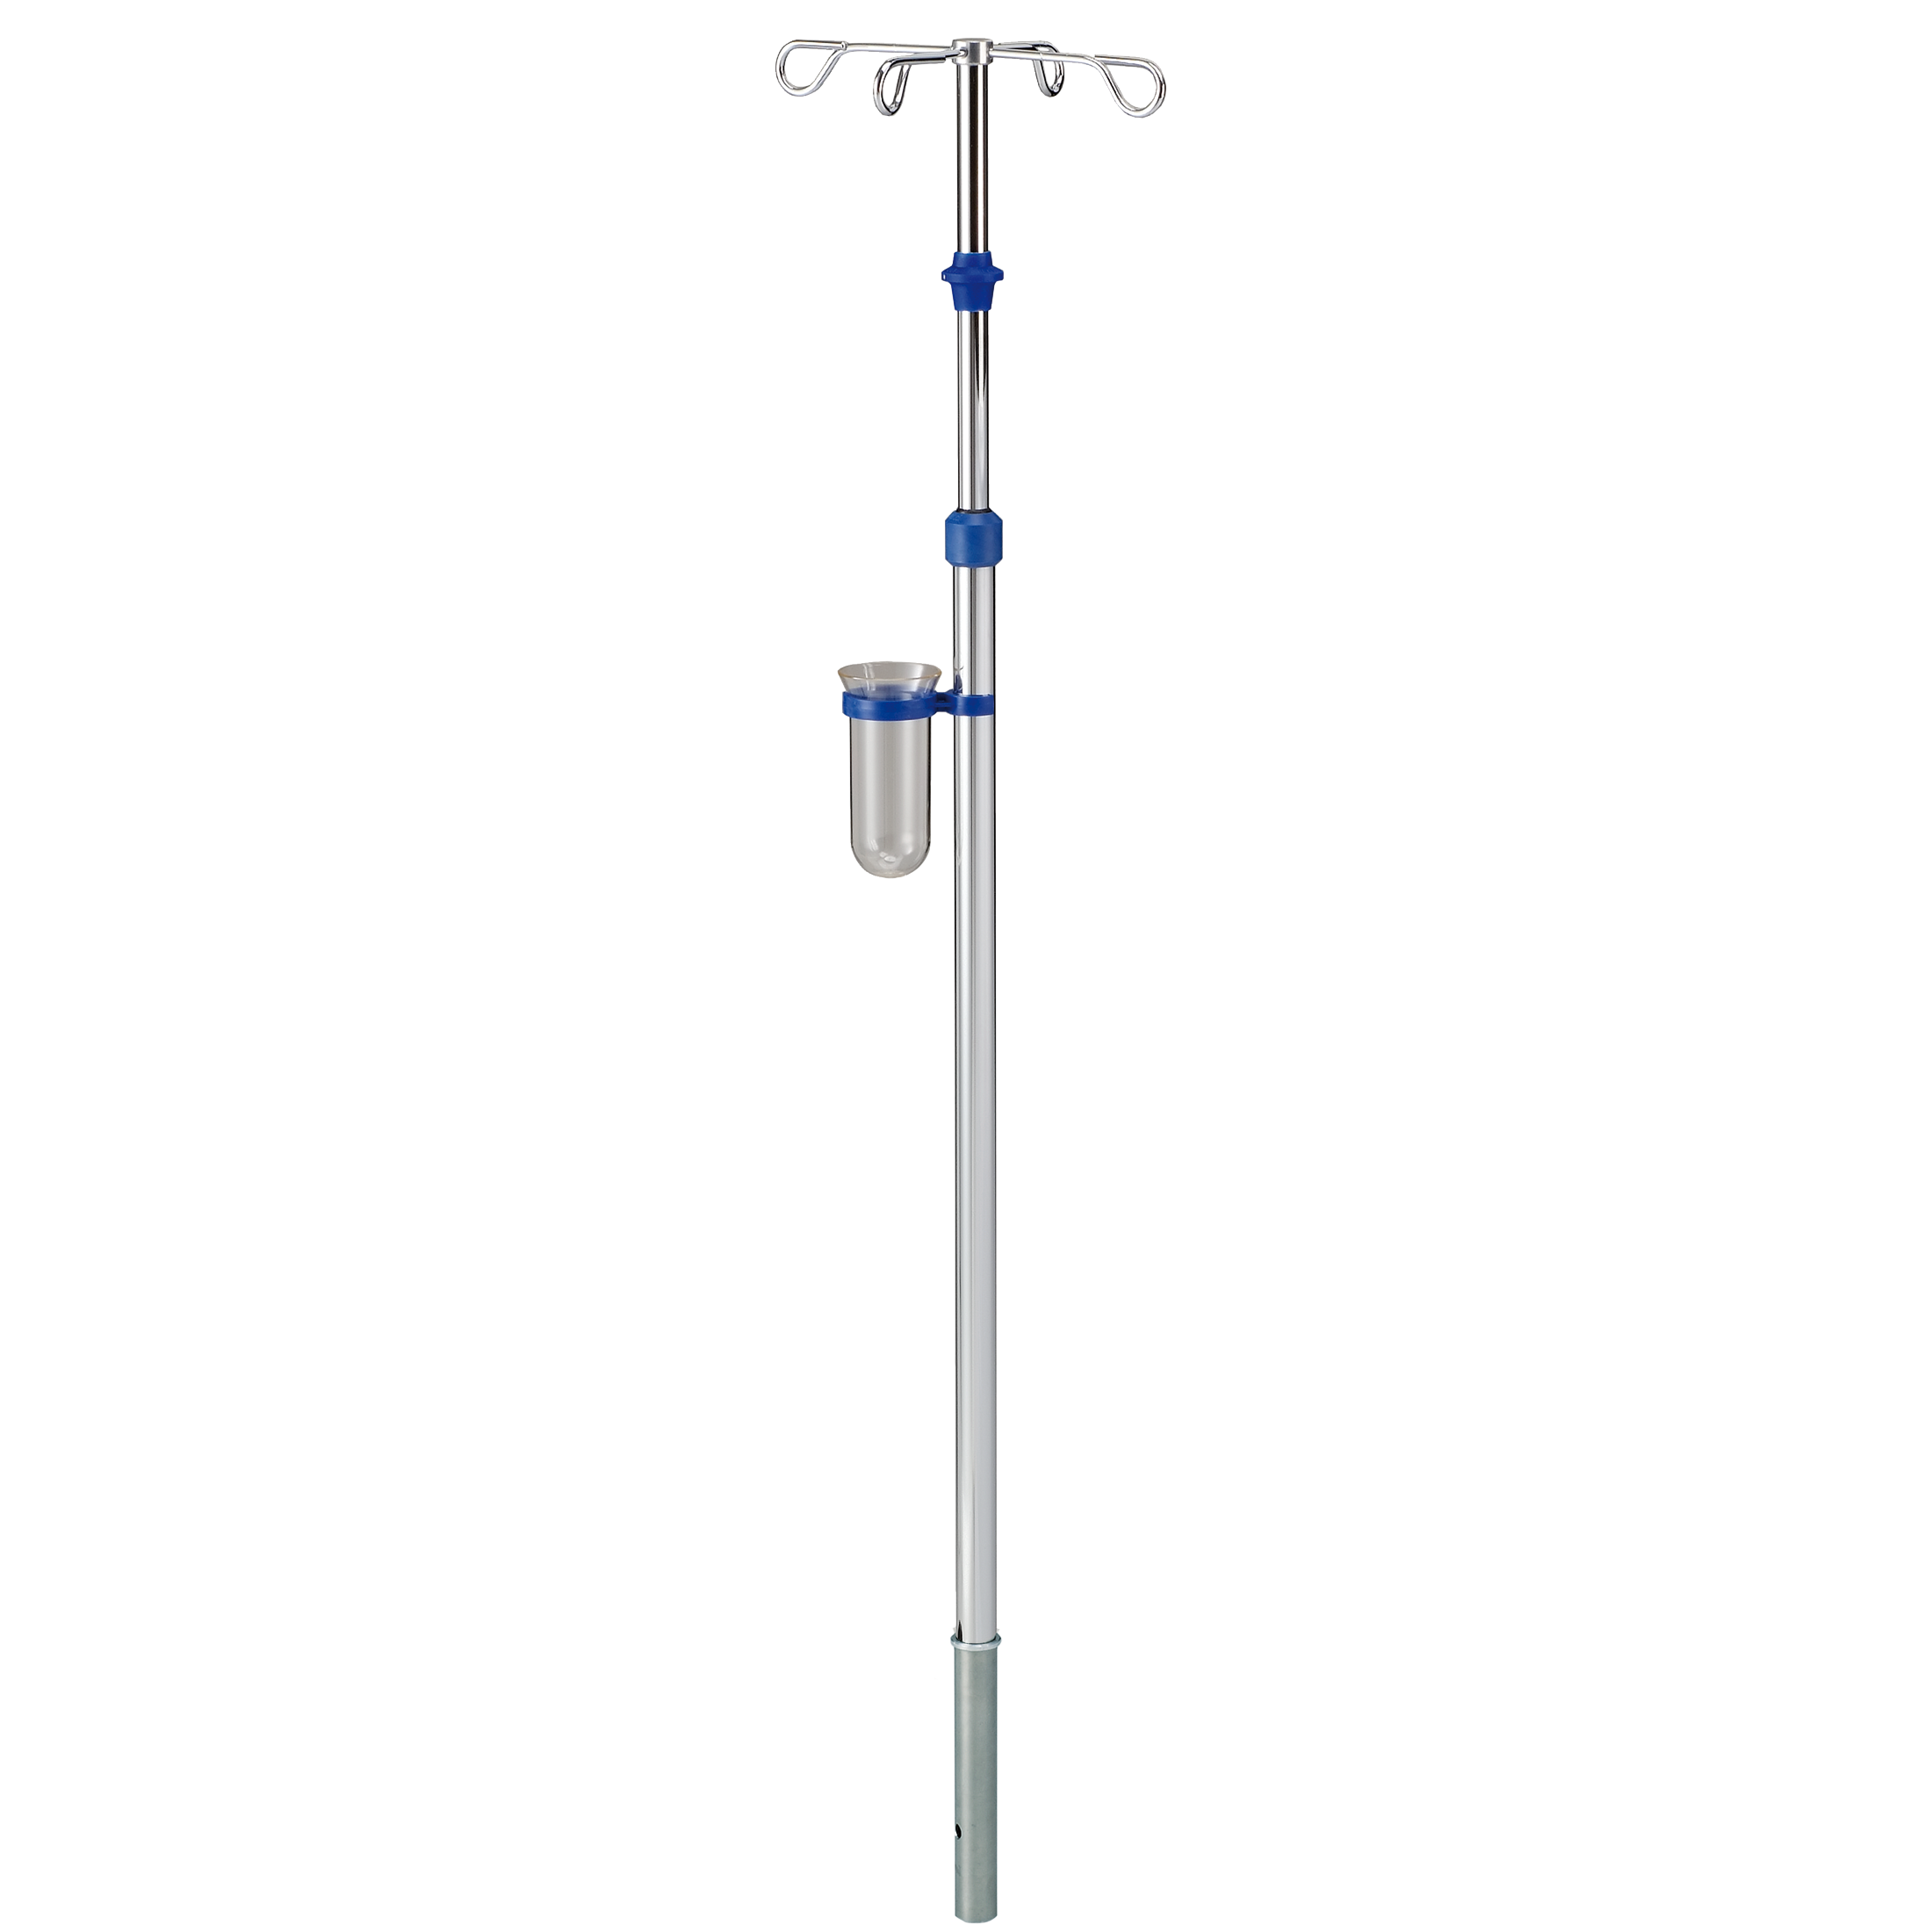 IV-Pole / Drip stand for bed post